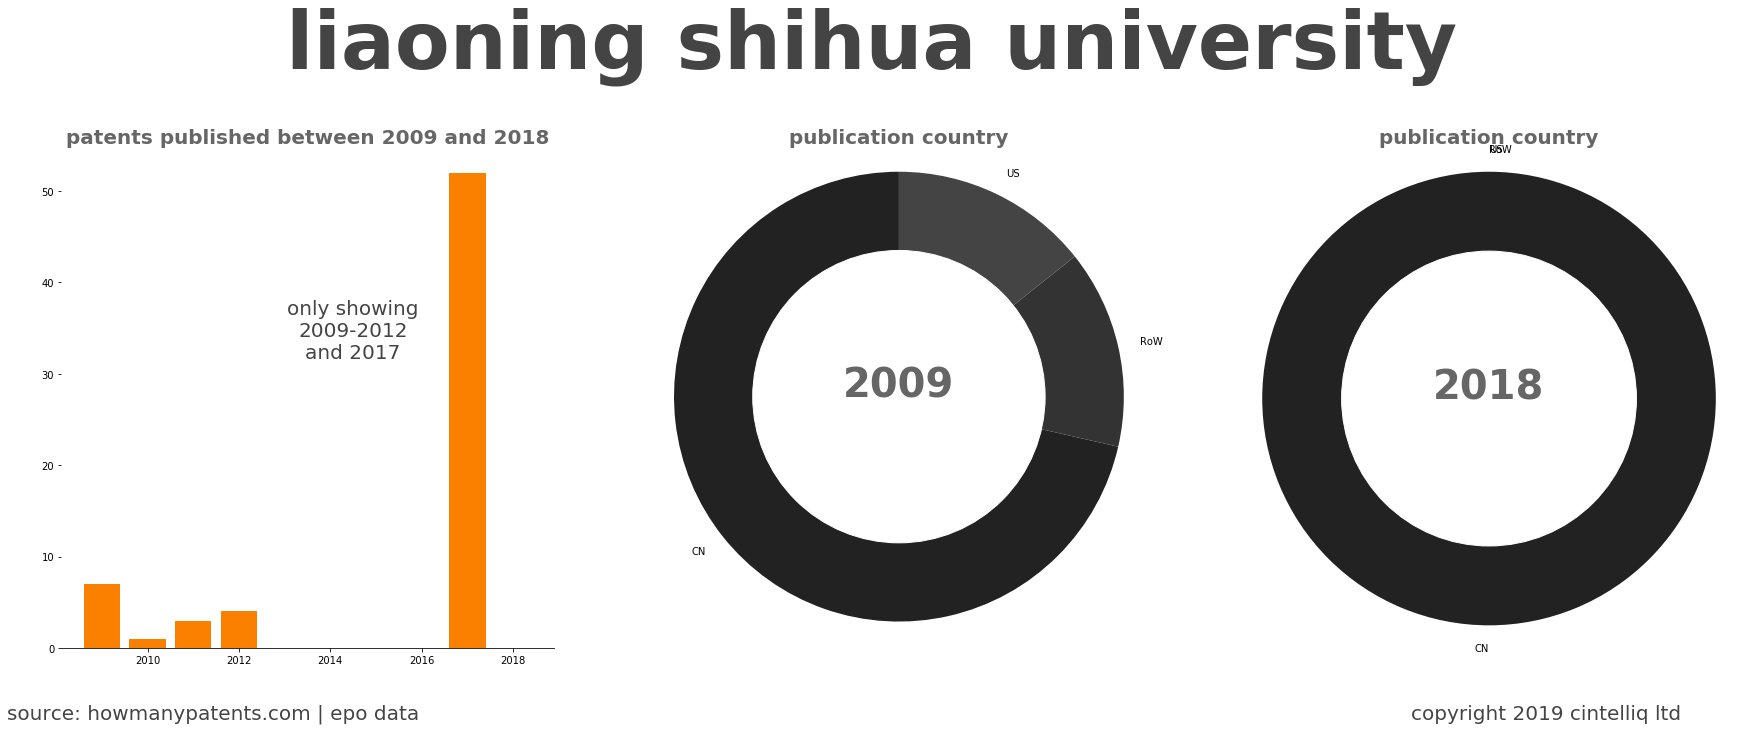 summary of patents for Liaoning Shihua University